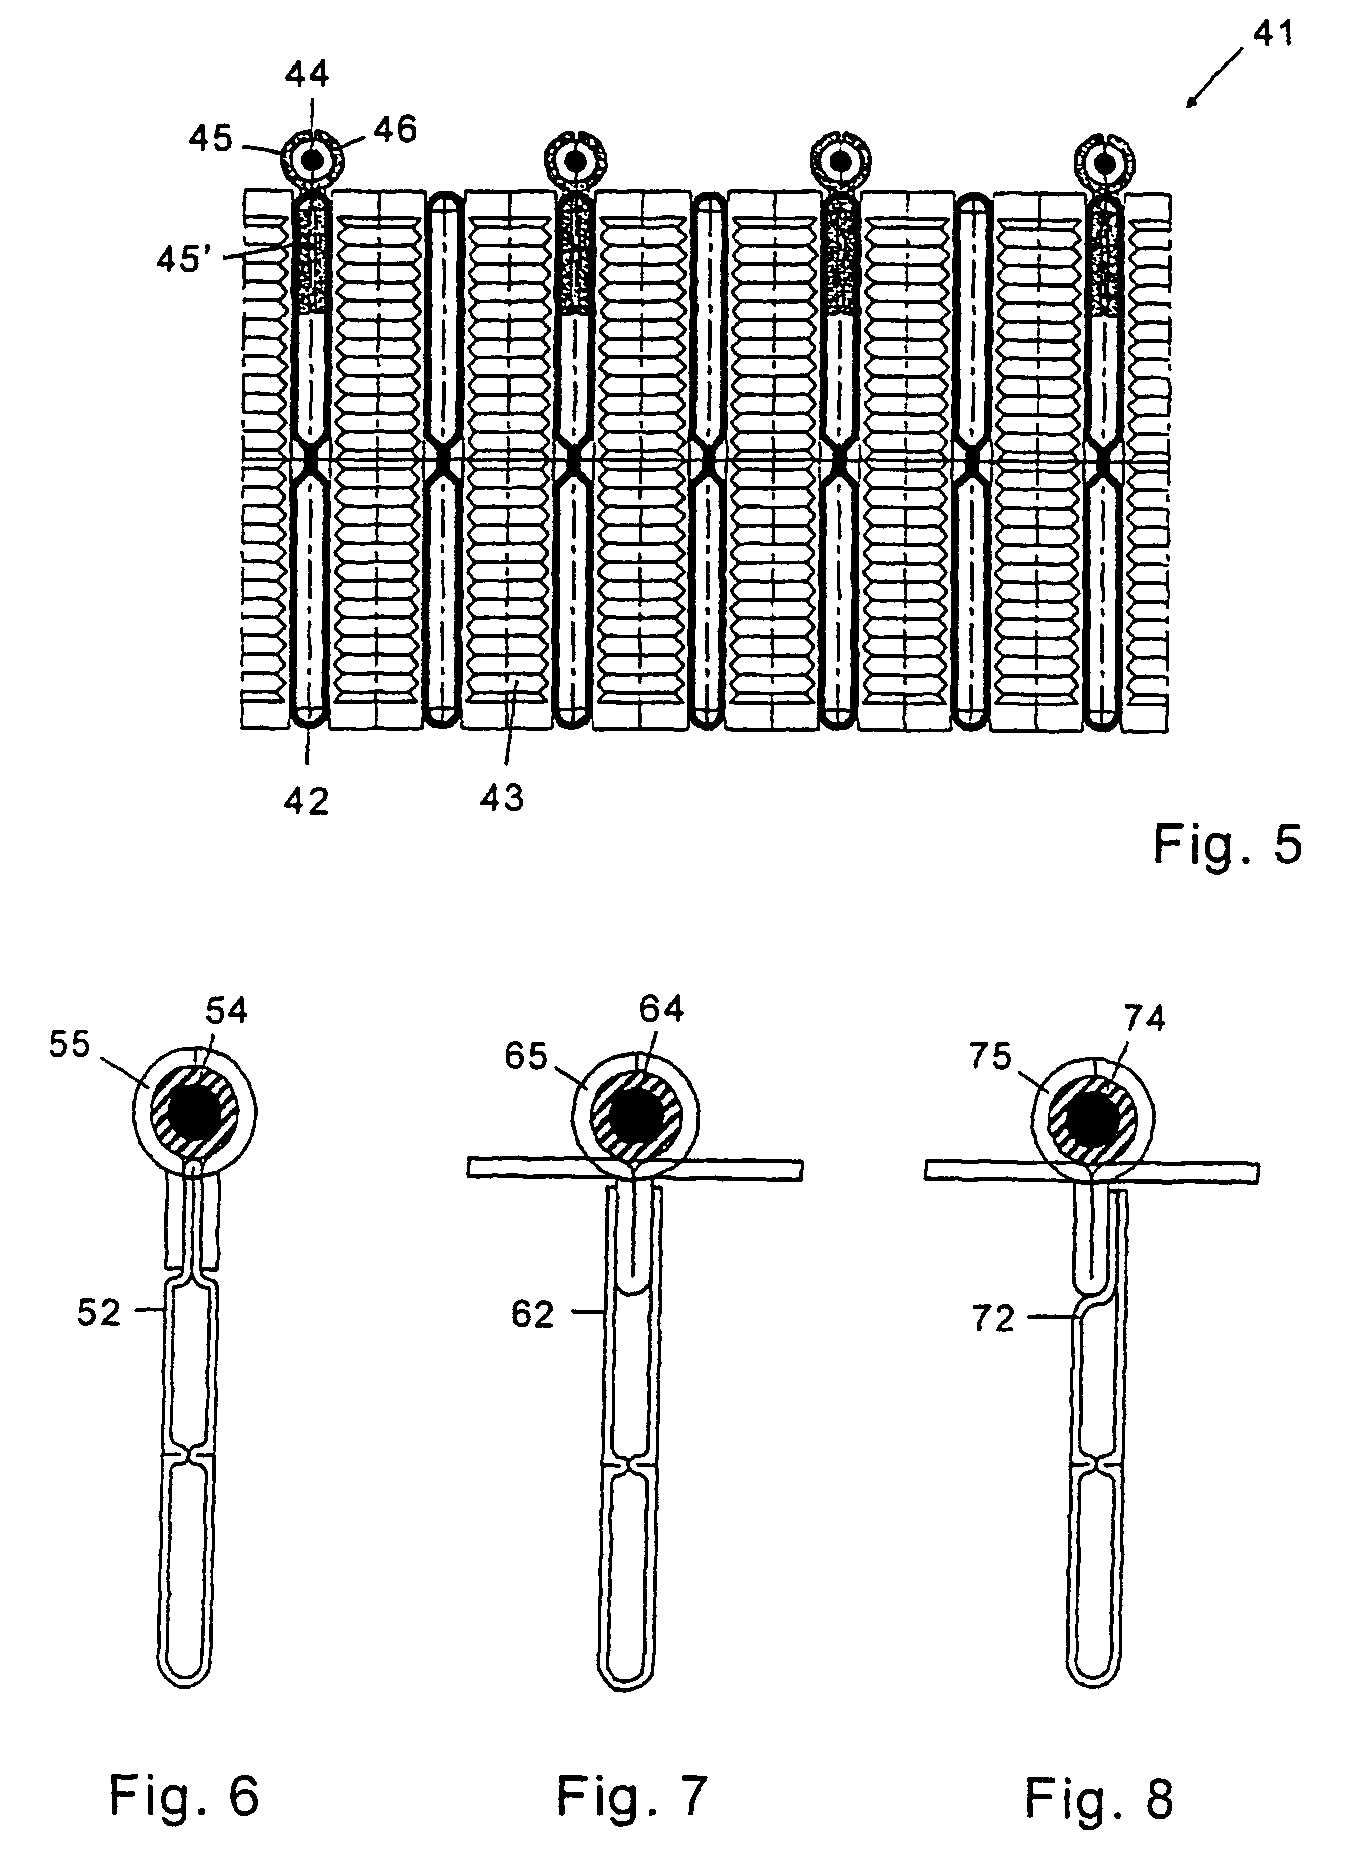 Heat exchanger, particularly for a heating or air conditioning unit in a motor vehicle